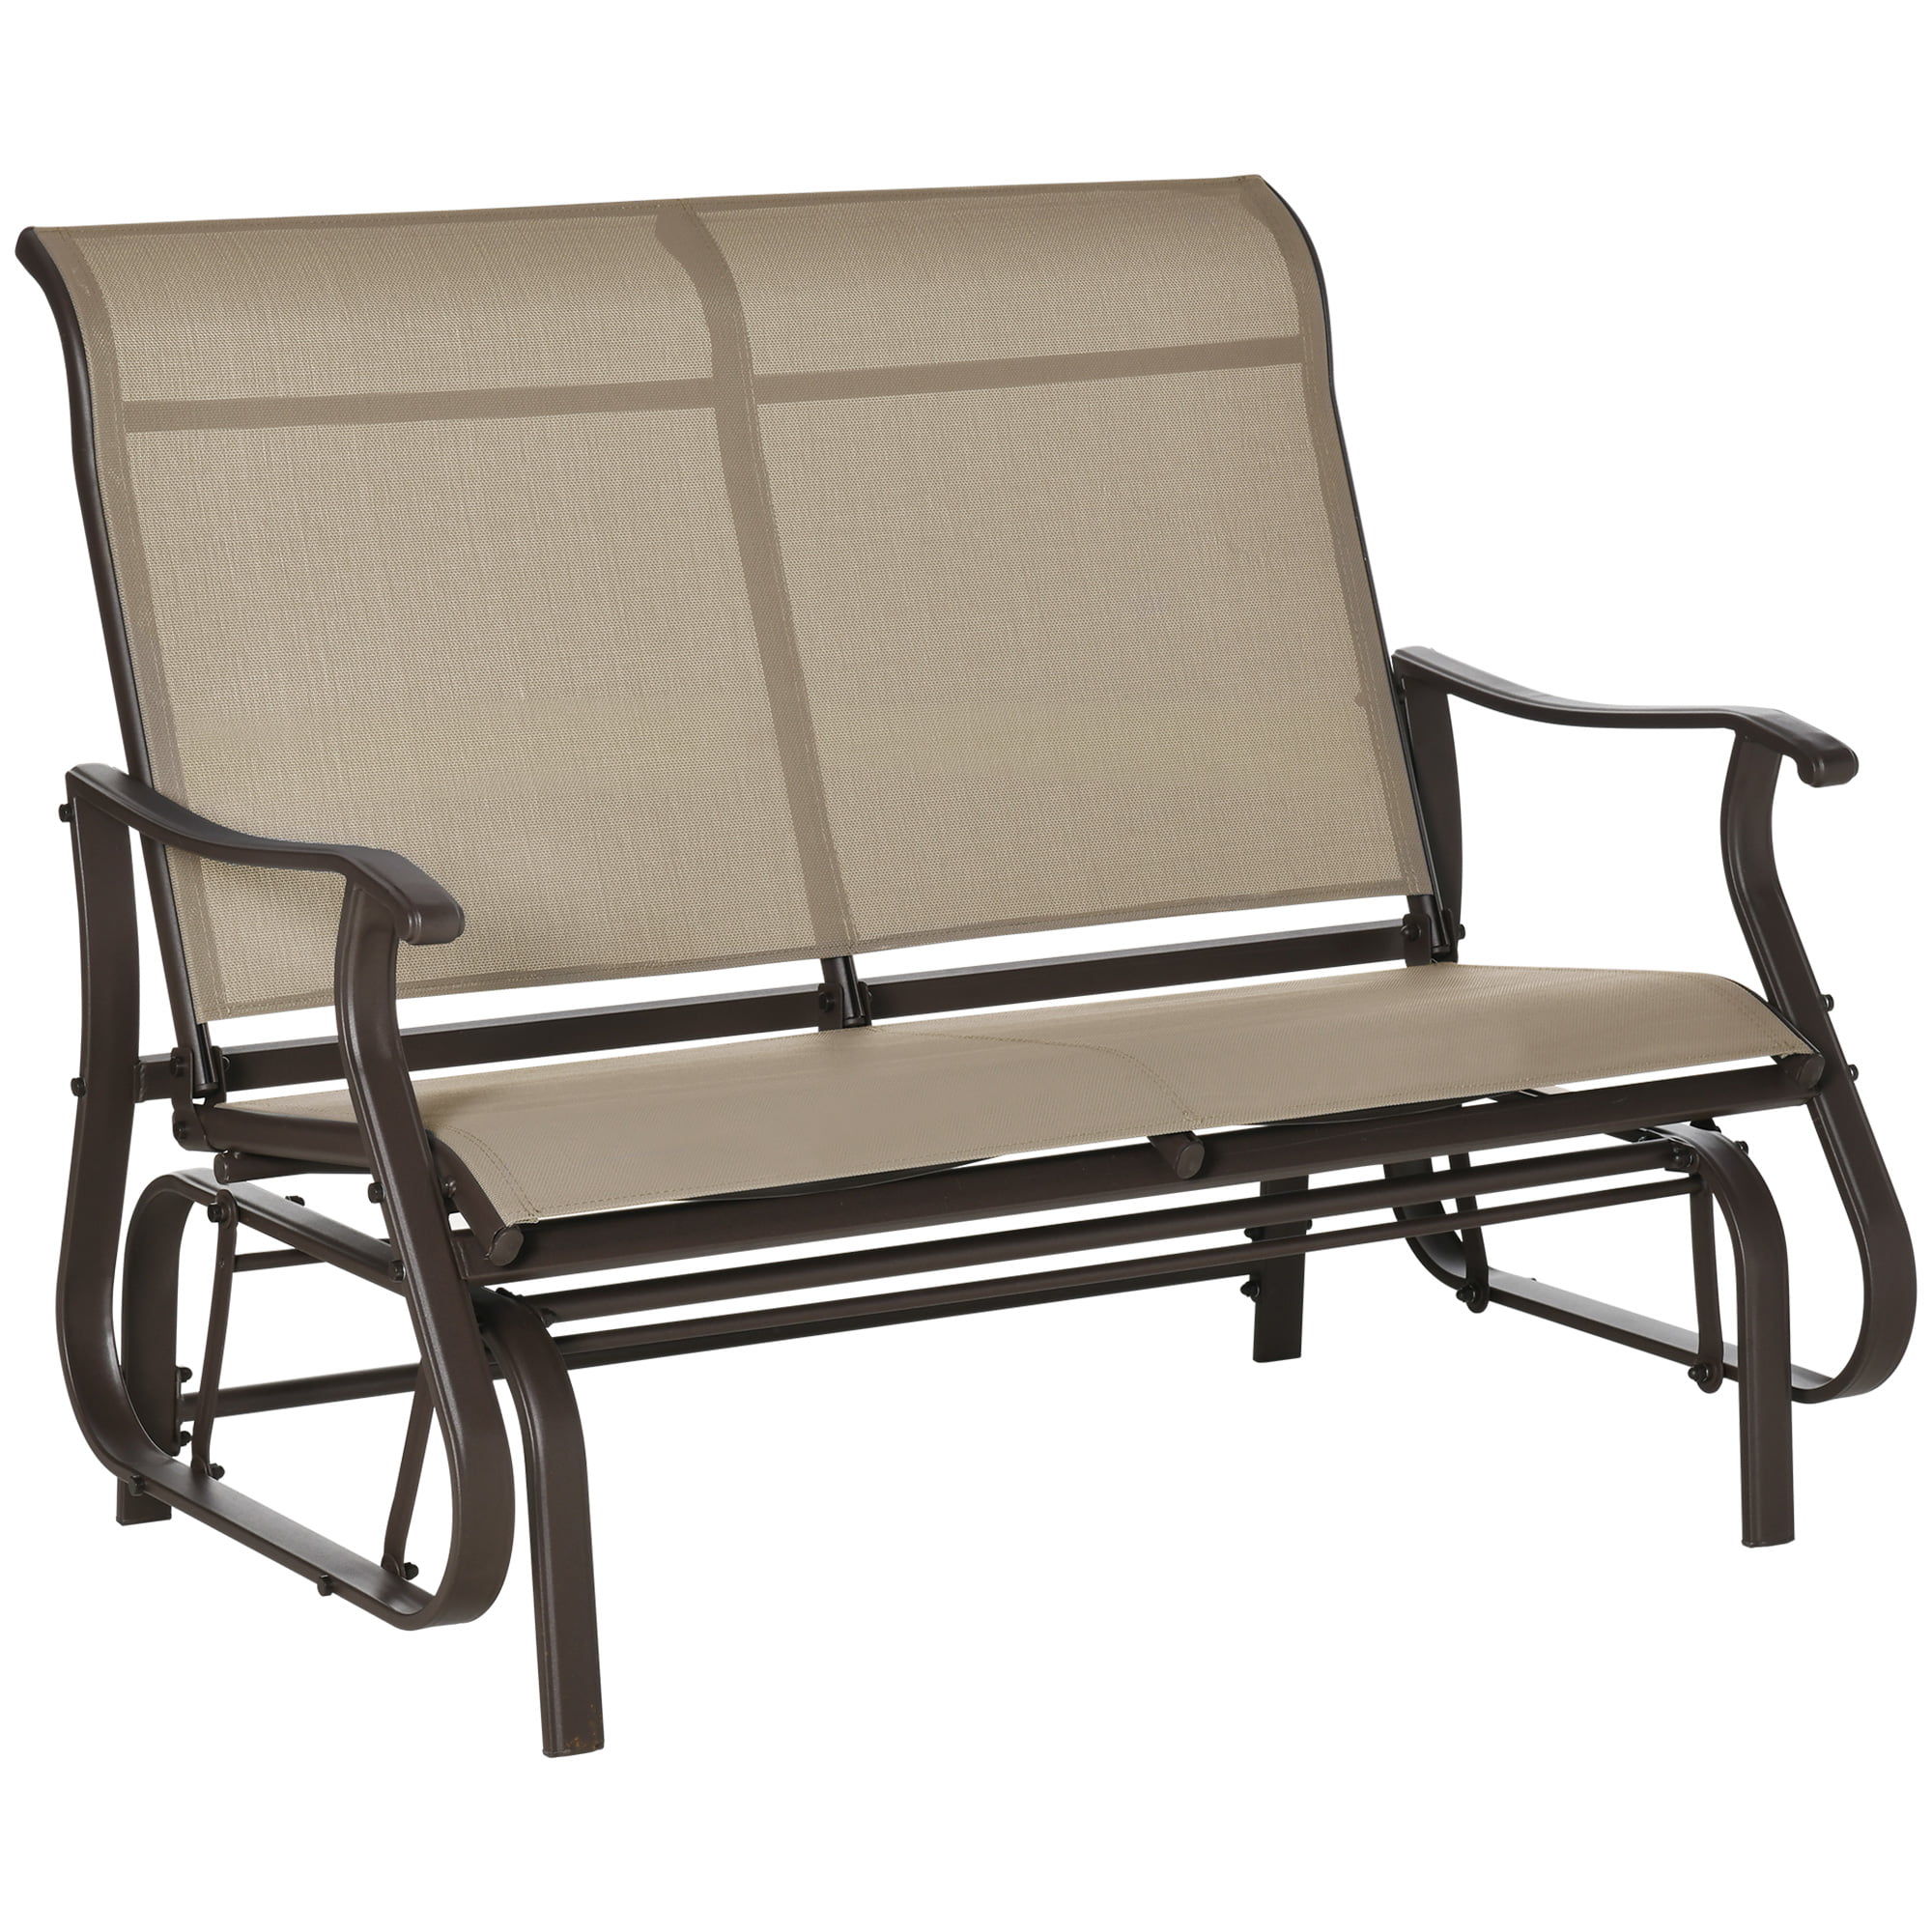 Details about   Patio Cushioned Loveseat Glider Outdoor Rocking Bench Sturdy+Relaxing w/Armrests 